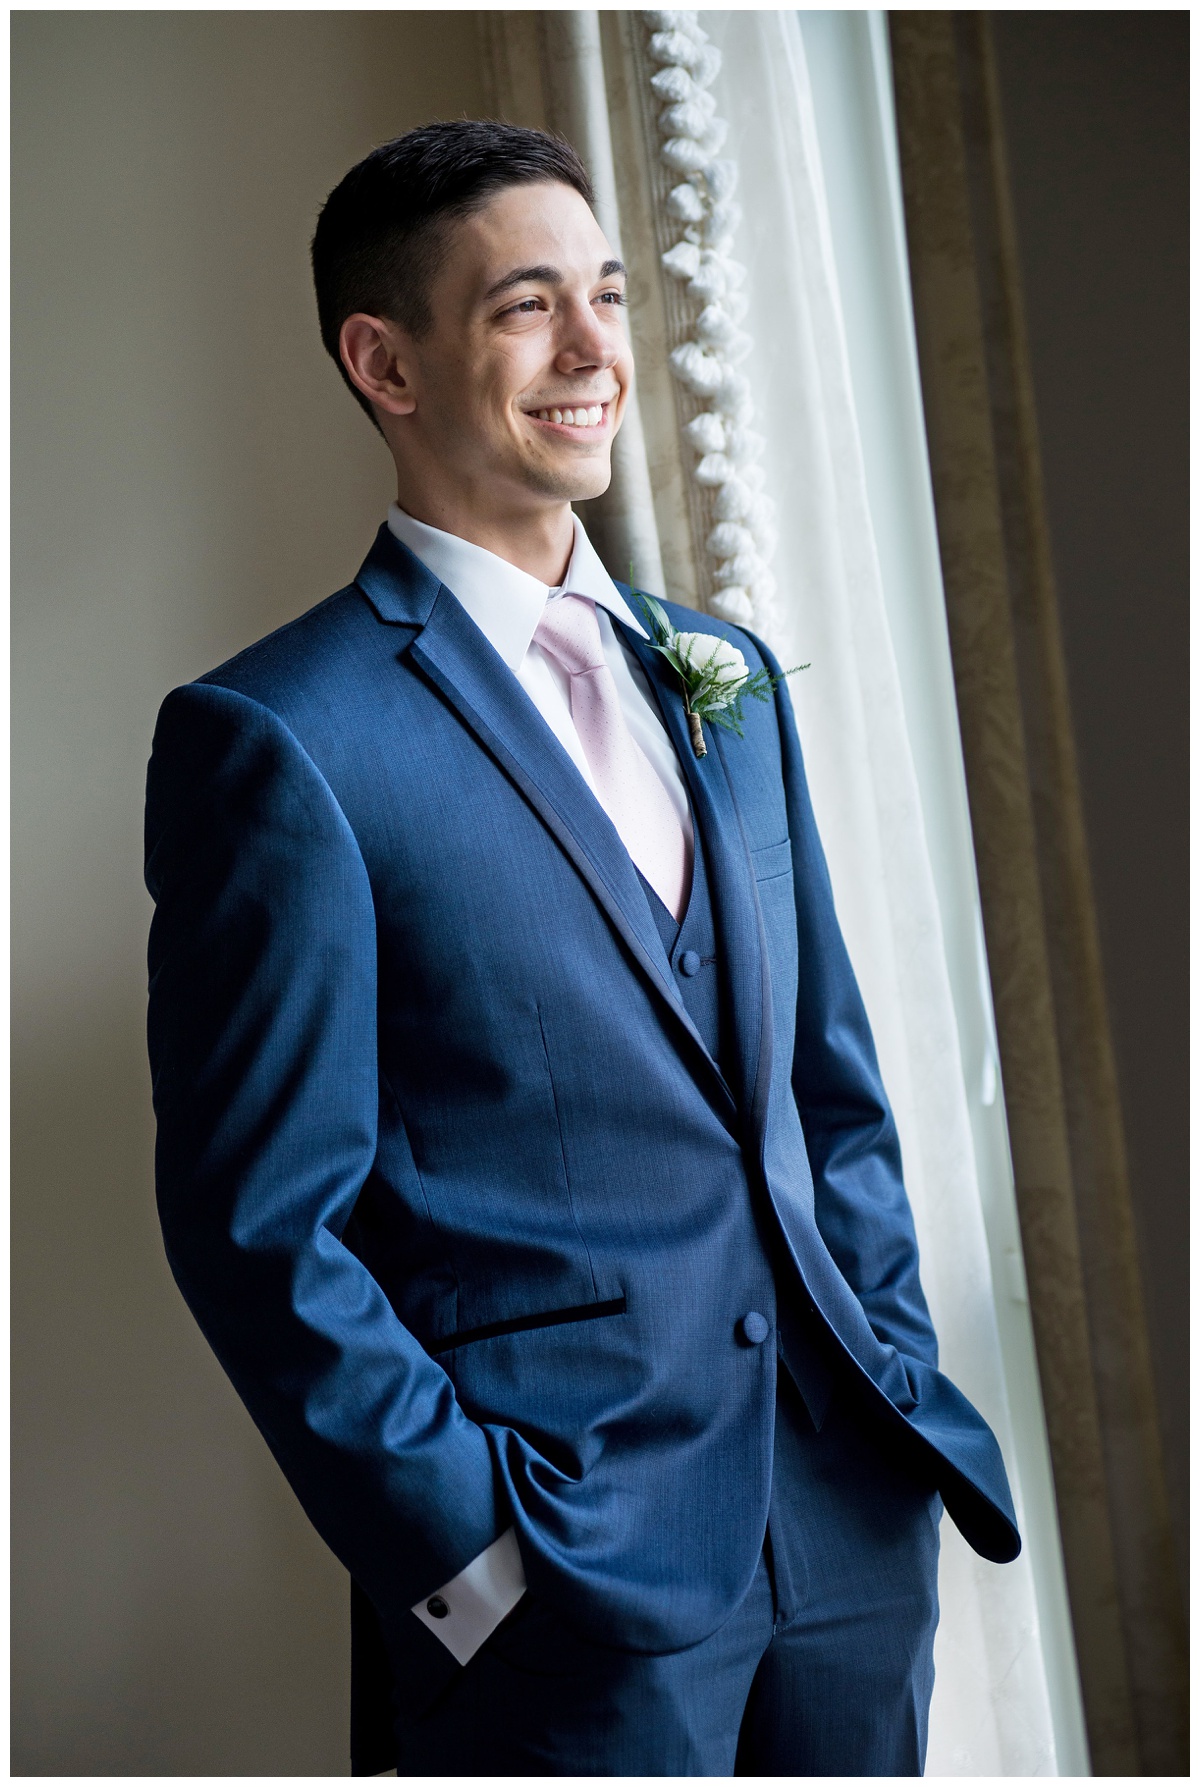 photo of smiling groom at june wedding in the summer - looking out window in blue suit with light pink tie at The Oaks Waterfront Inn - getting ready photo